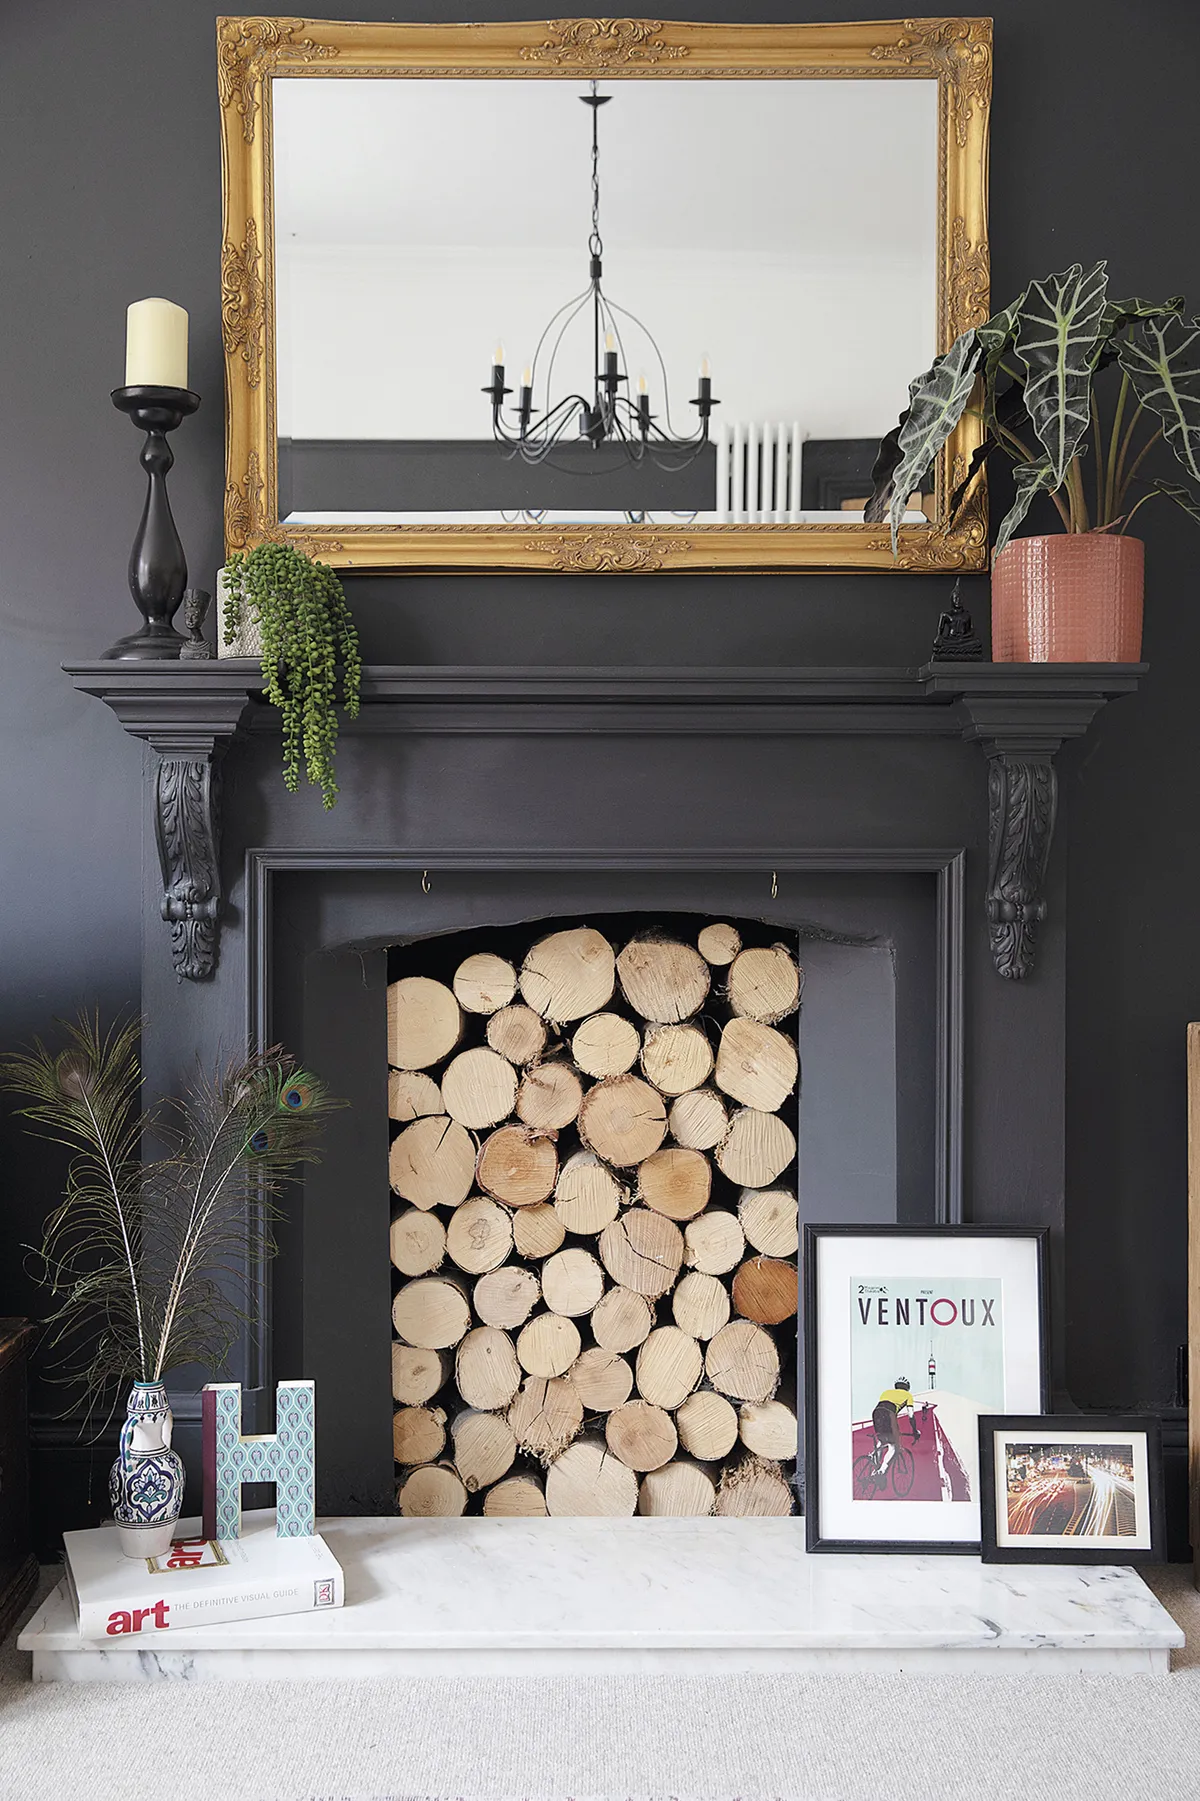 ‘We broke the original Victorian fireplace trying to remove the tiles, so we replaced it with a £50 marble hearth and oak surround from Facebook Marketplace,’ says Sam